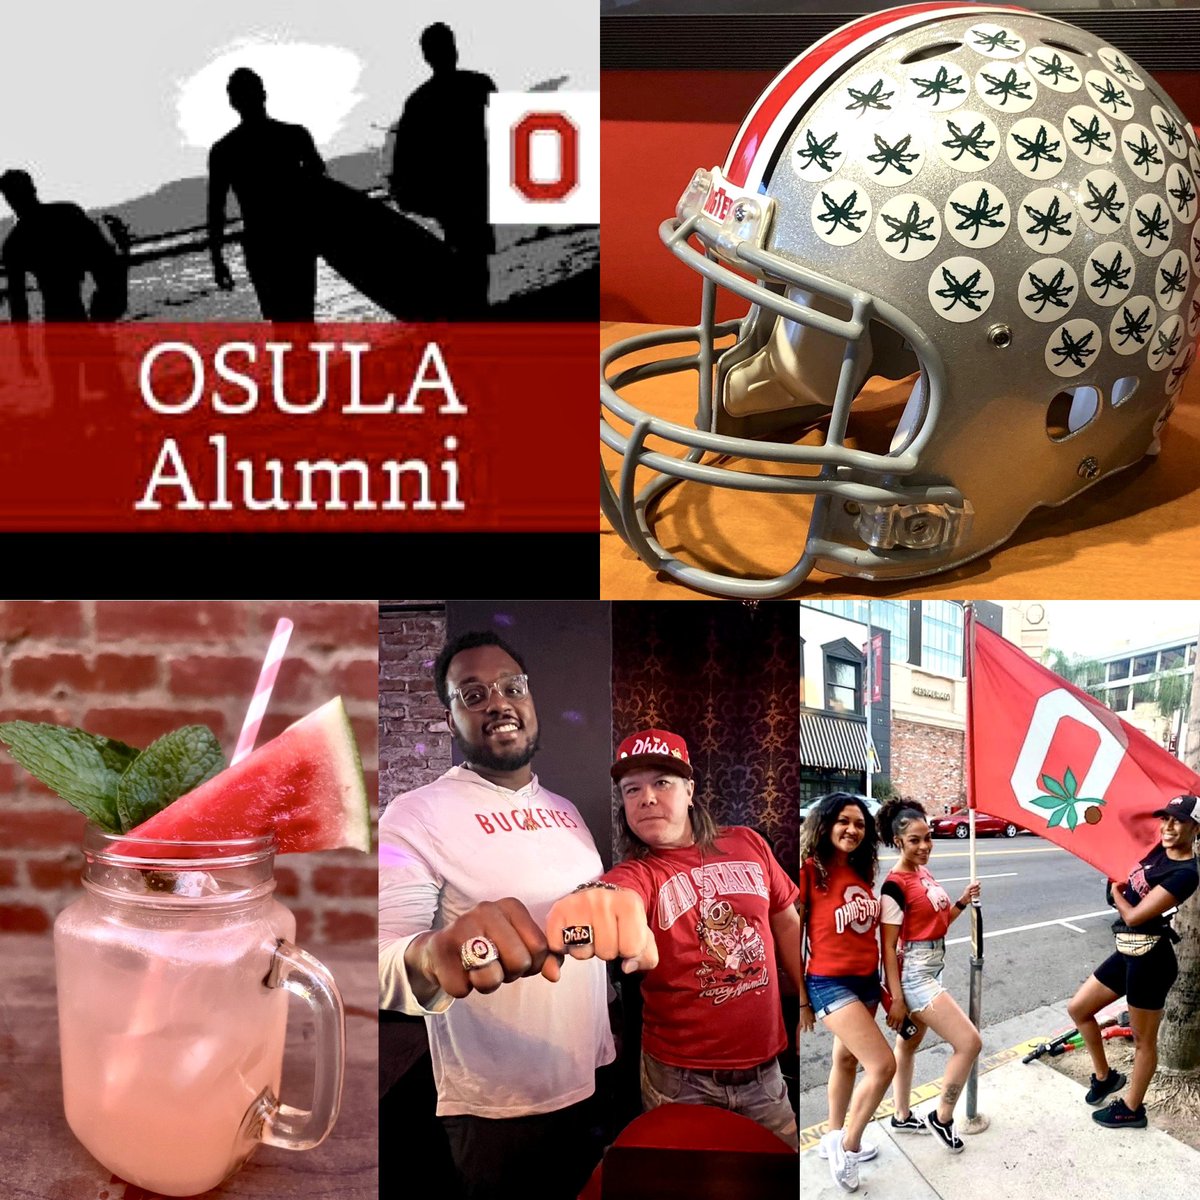 THE Ohio State Football Season Kicks Off this Saturday!  #3 Buckeyes vs The Indians Hoosiers at 12pm as the @OSU_LA at @StFelixHwd Game Watch festivities begin!  New Game Day Menu Specials!@OhioStateAlumni @OhioStateFB #StFelix #HollywoodEvents #LAEvents #OSU #OhioState